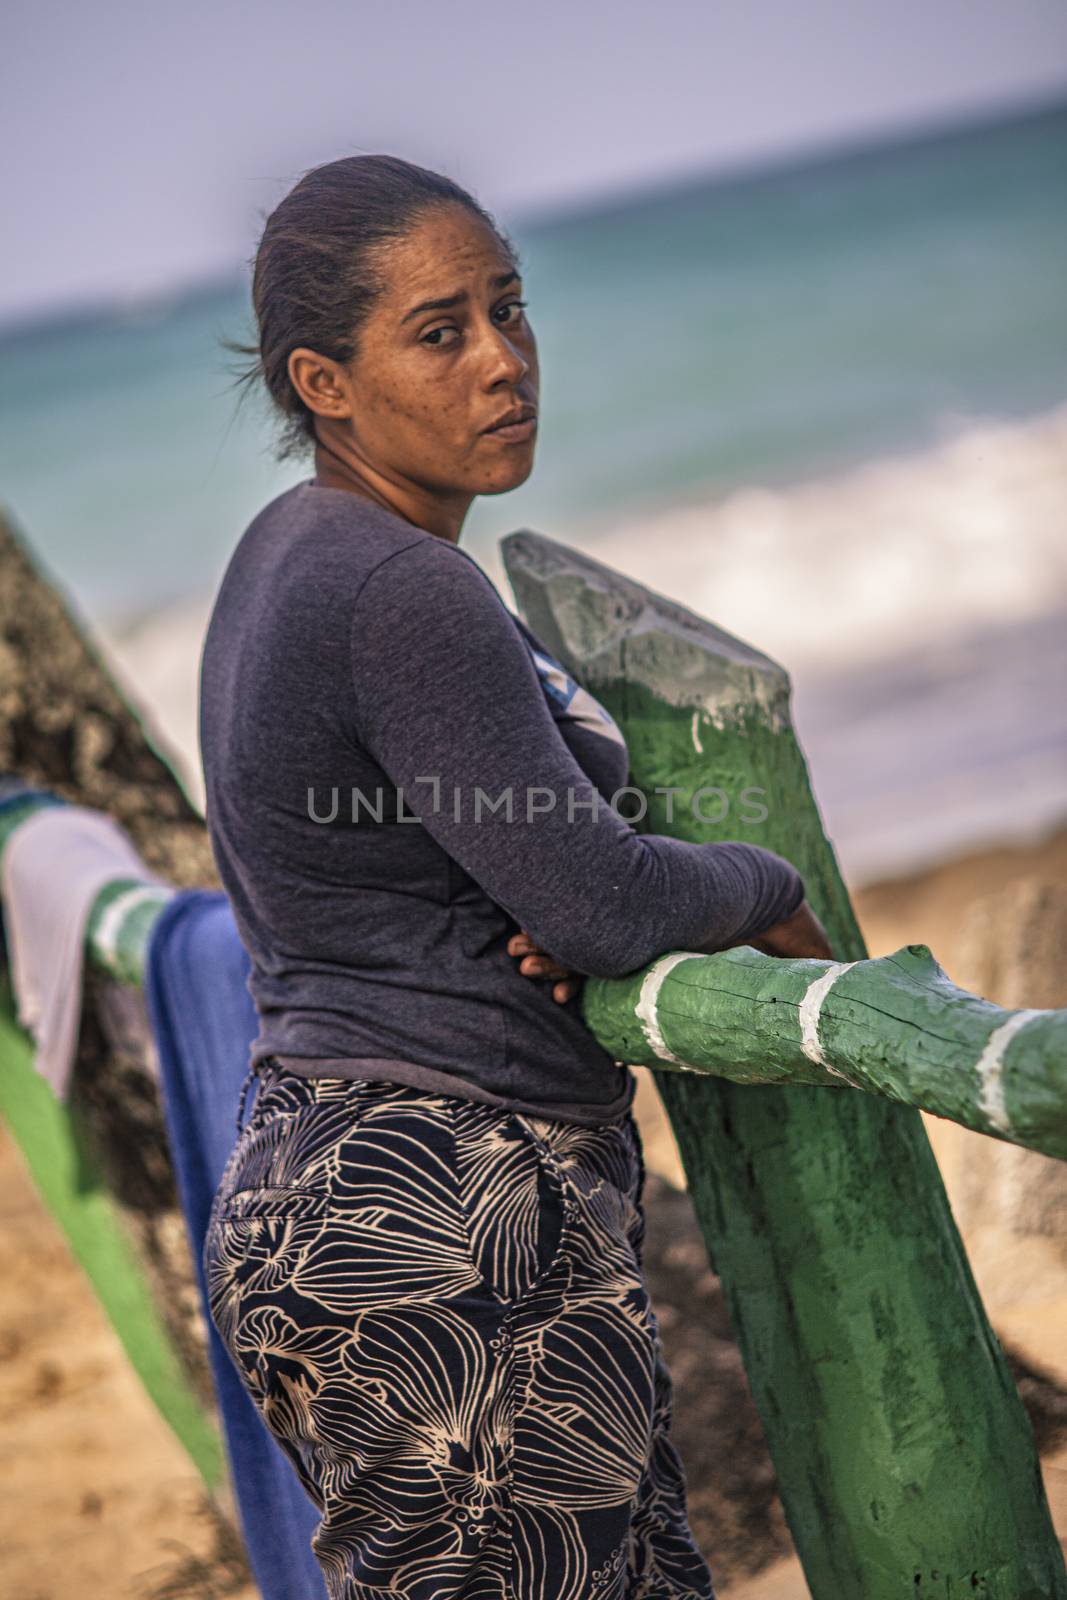 Dominican poor woman on the beach by pippocarlot